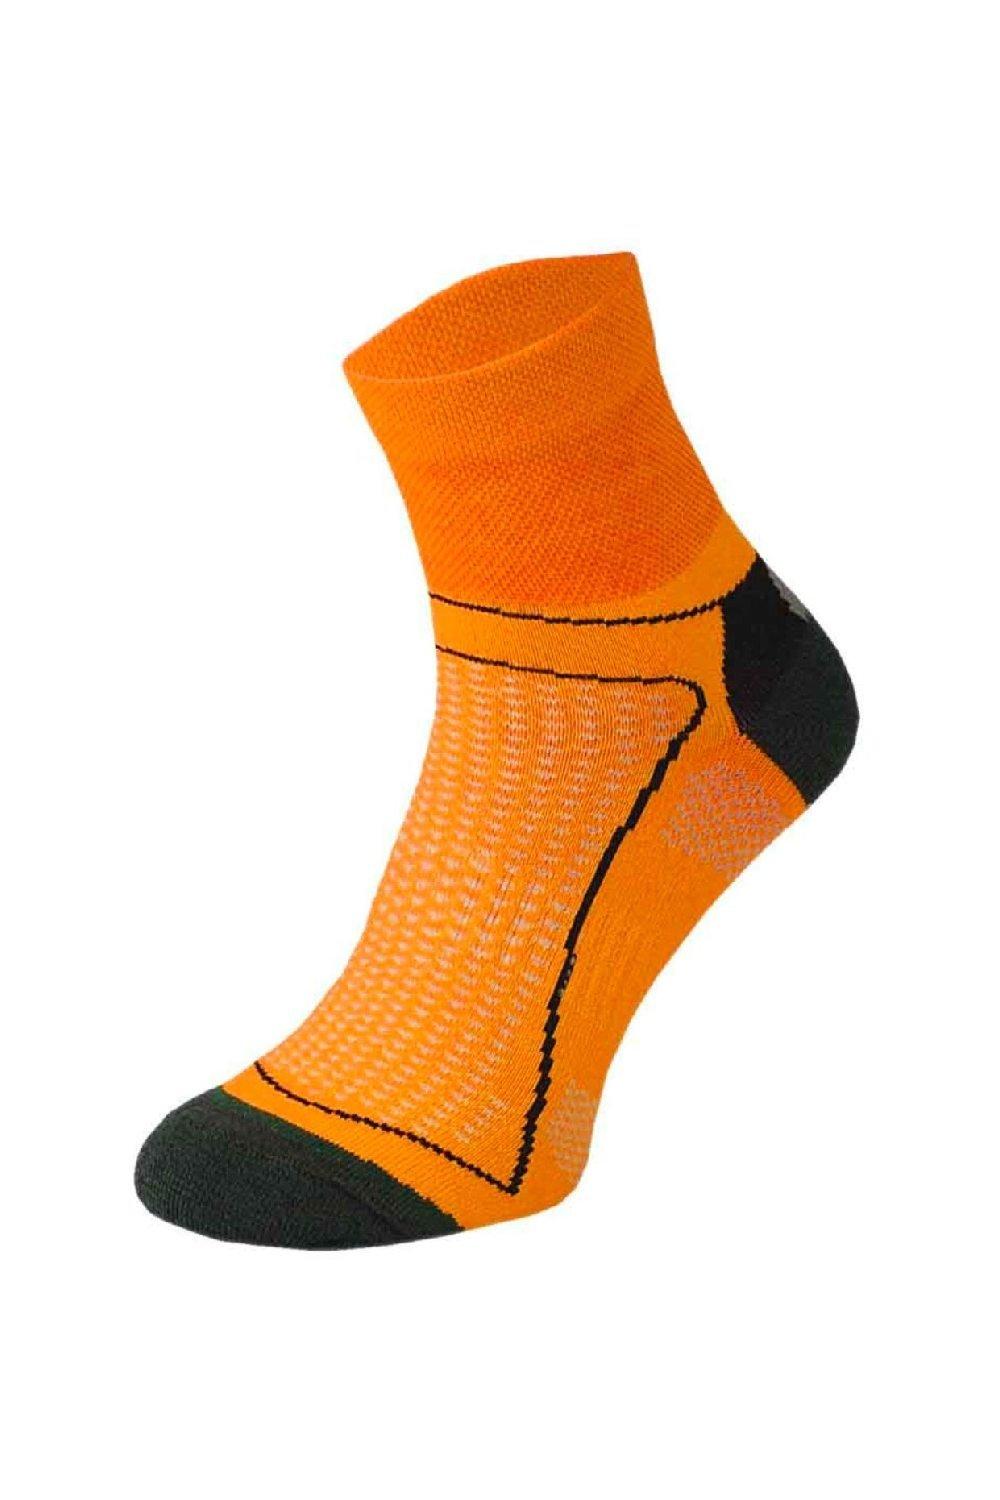 High Vis Bright Low Cut Ankle Neon Cycling Socks